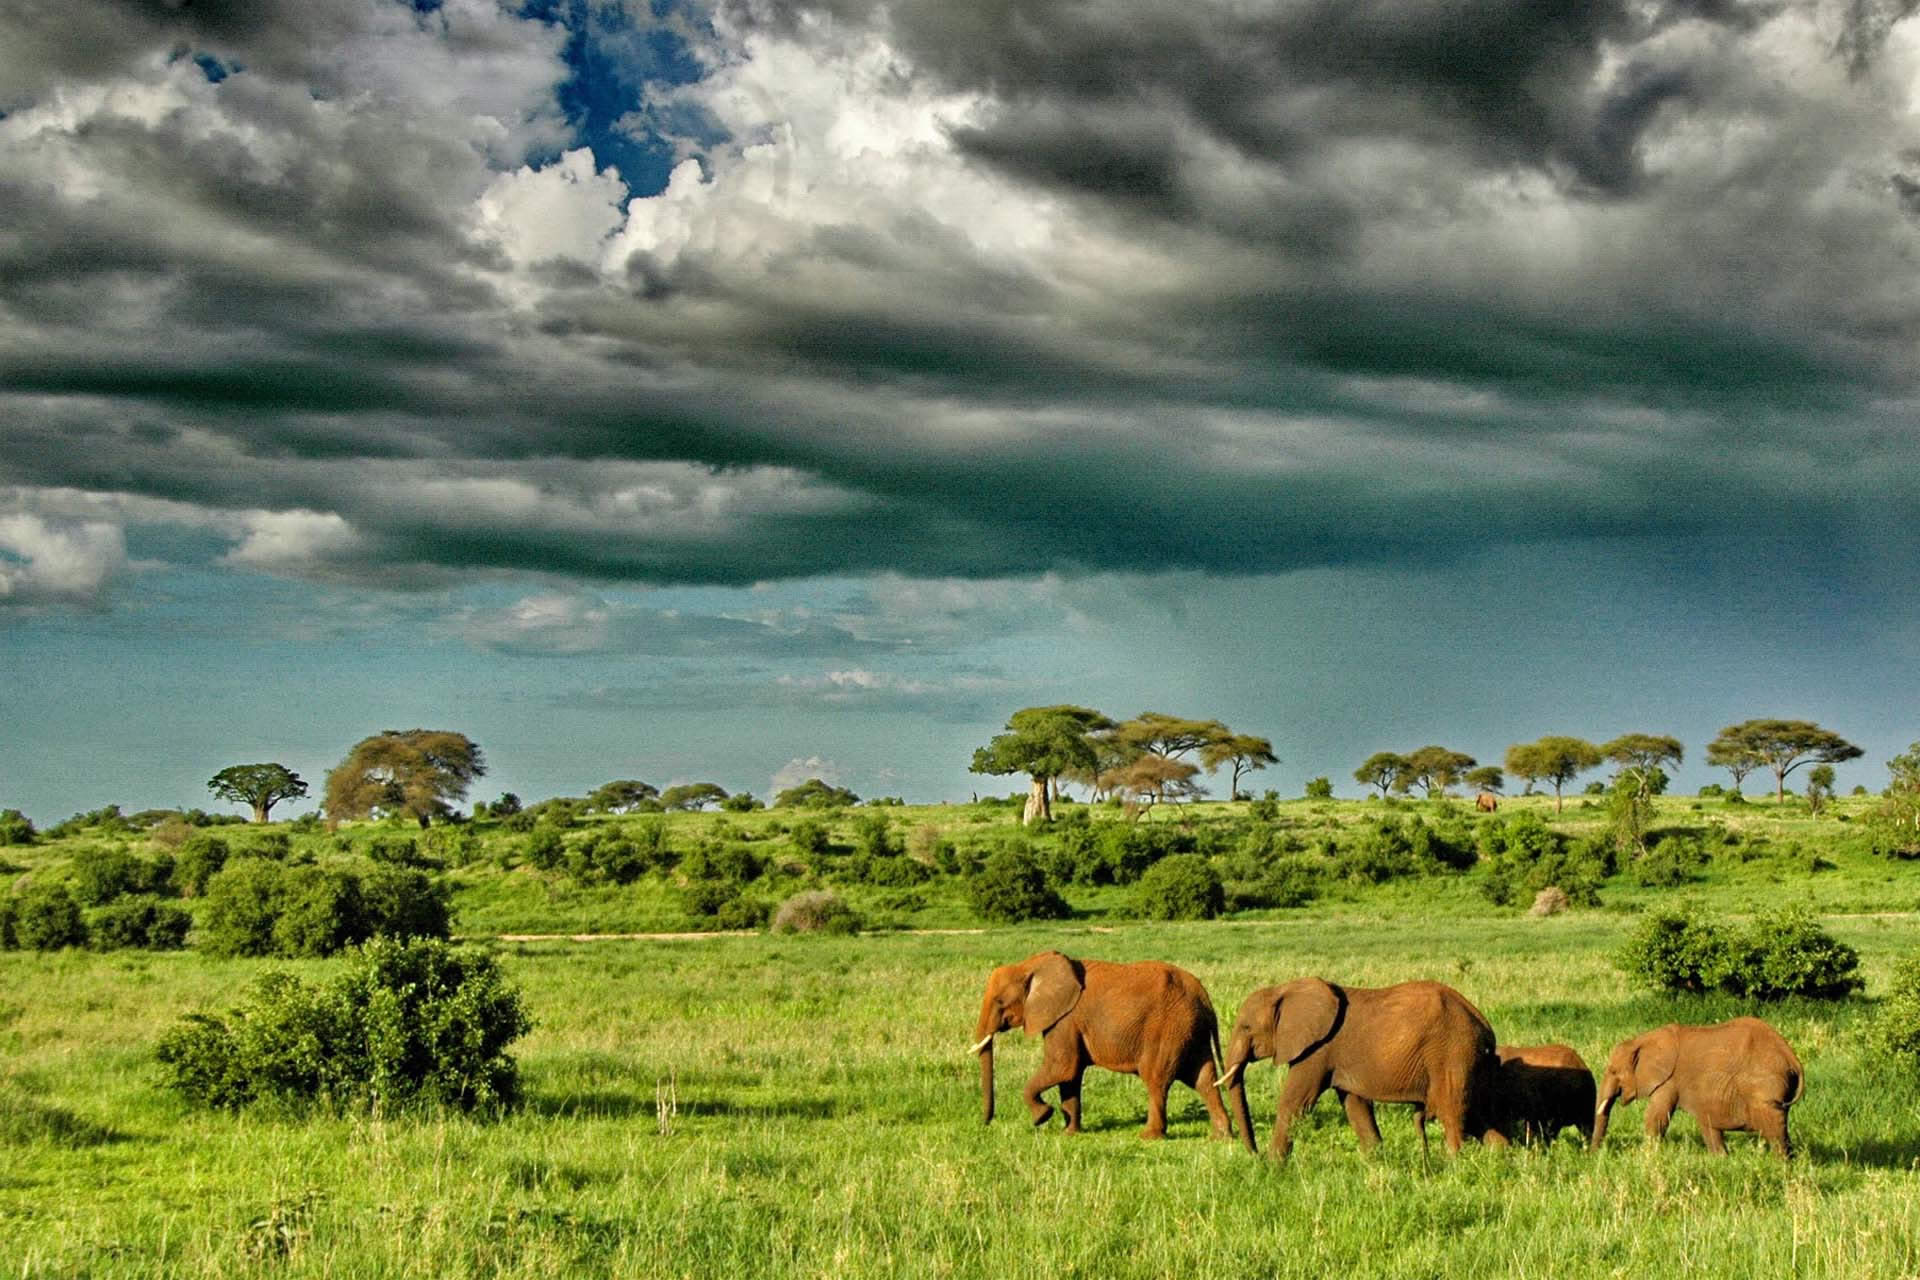 Best places to see Africa's elephants